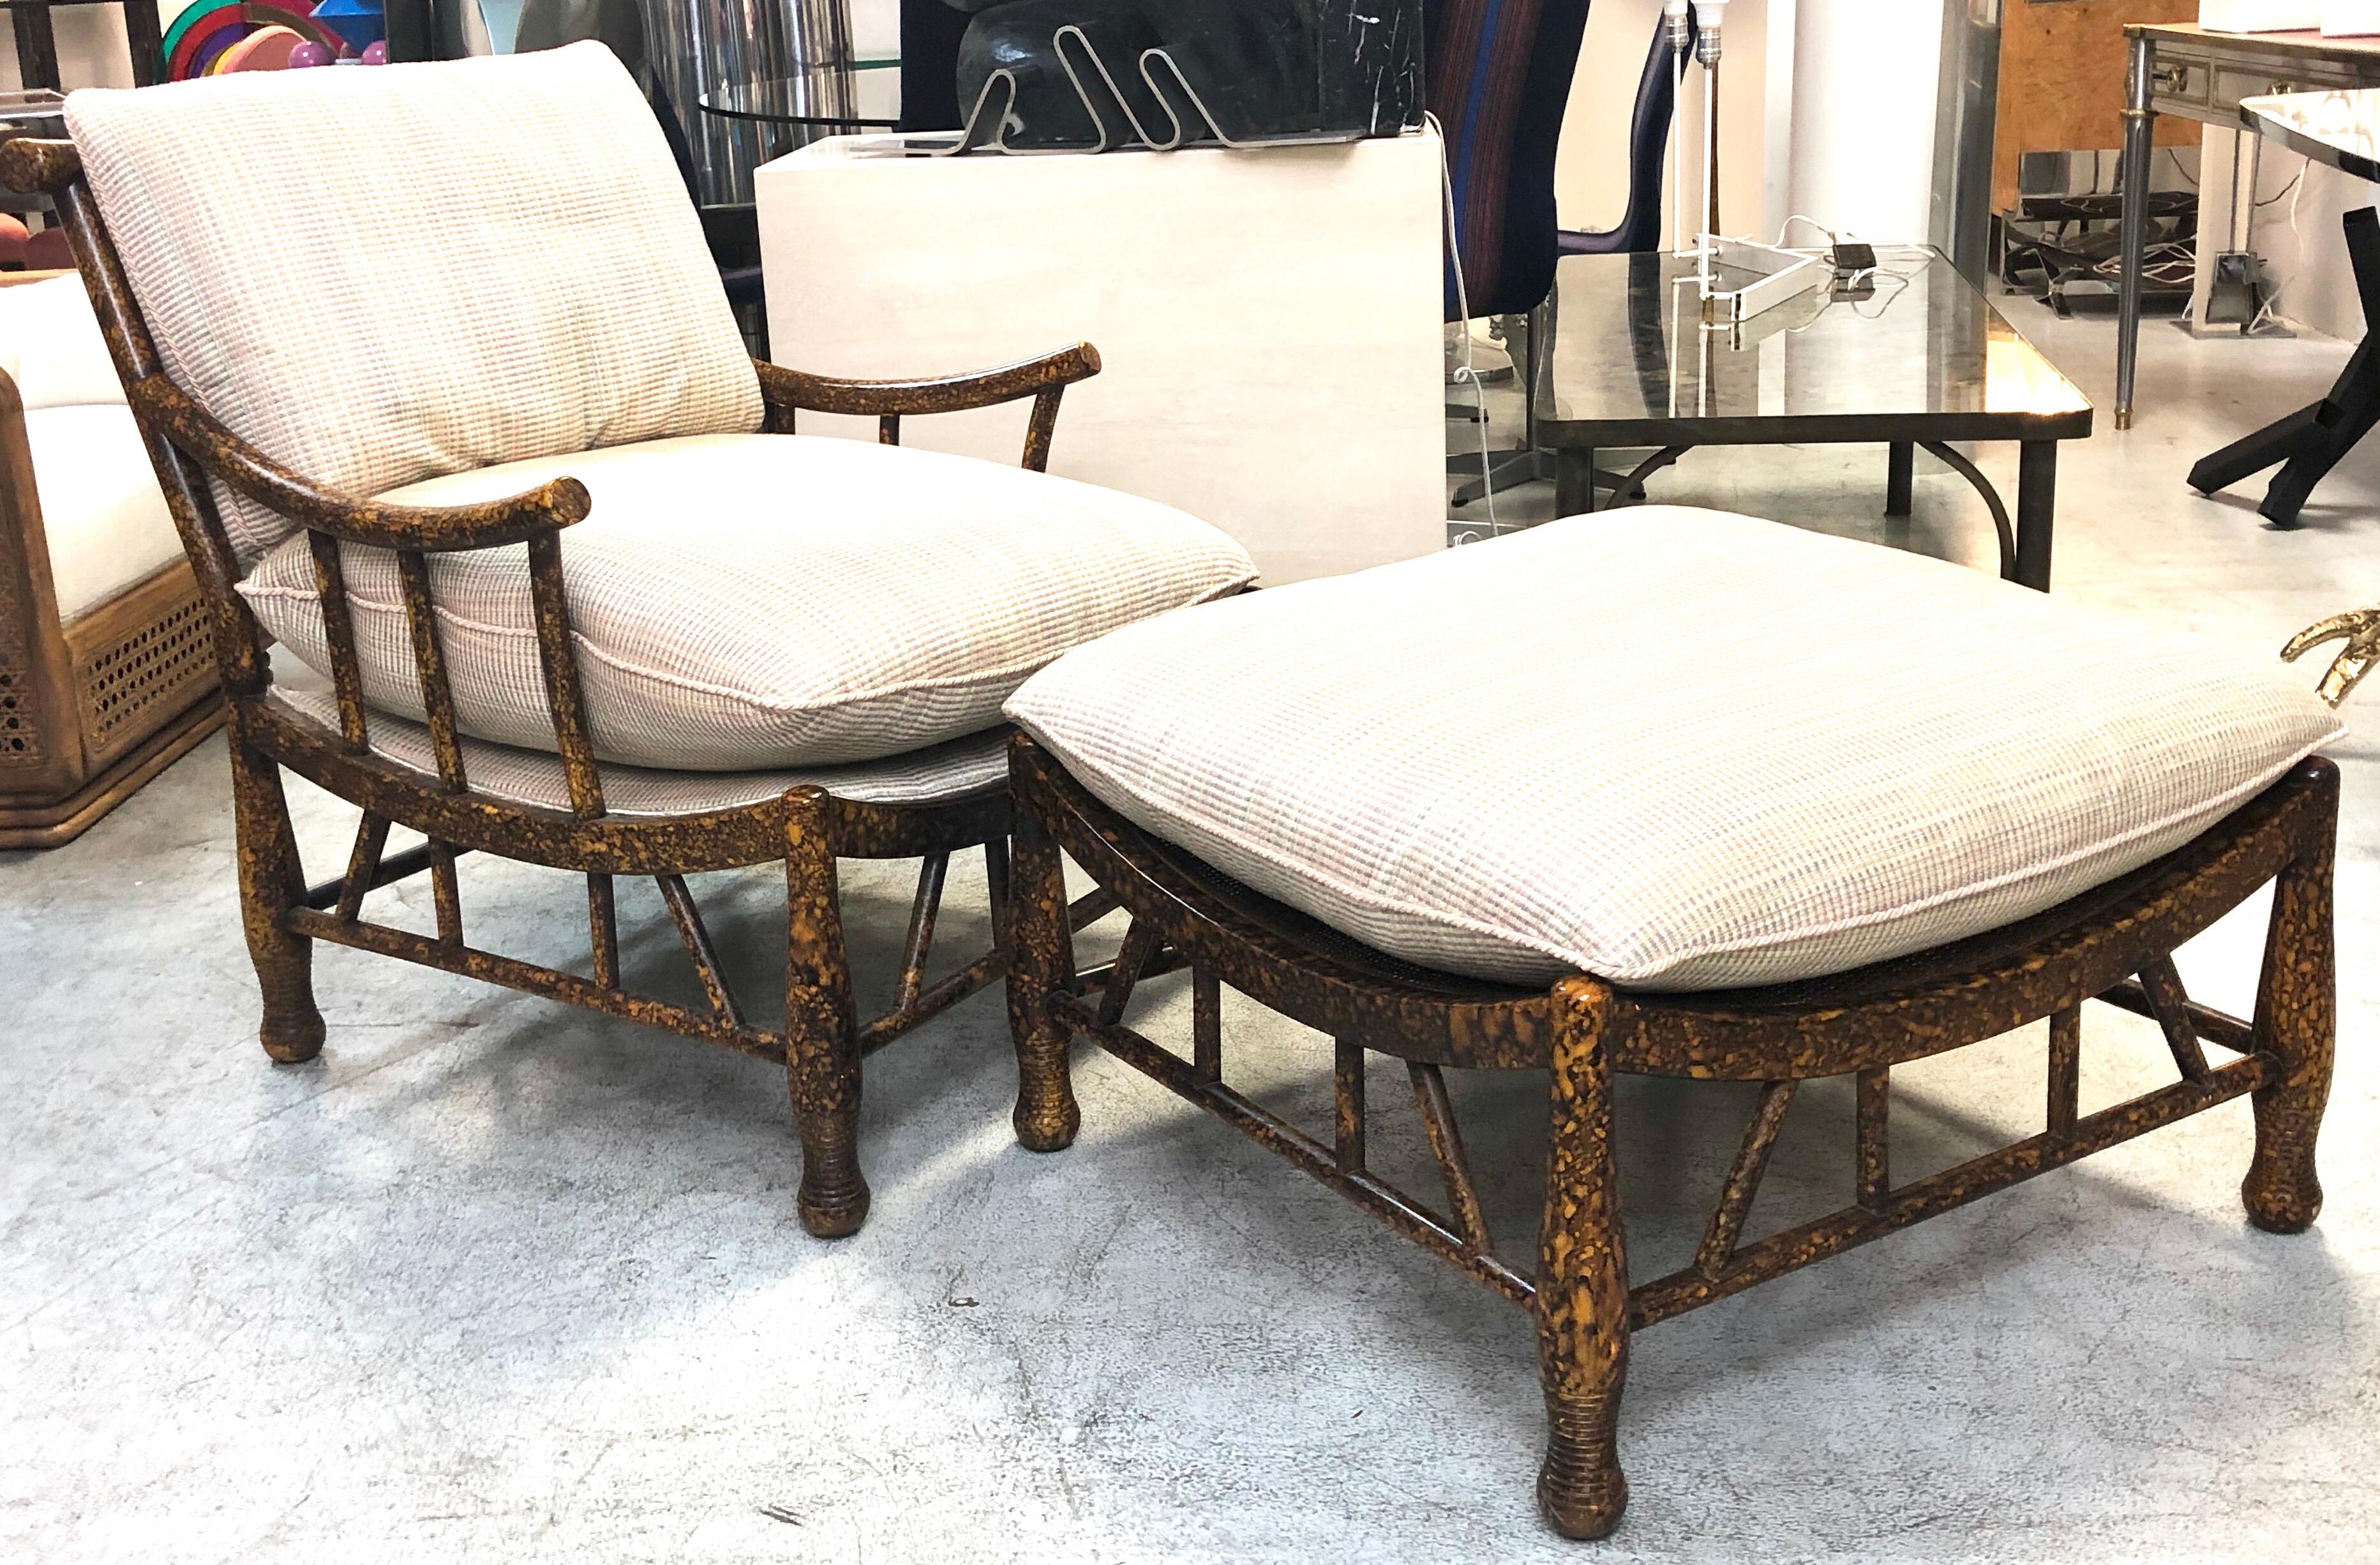 Super comfortable chairs and ottoman. Thebes style frames with a custom finish. Otoman is 28